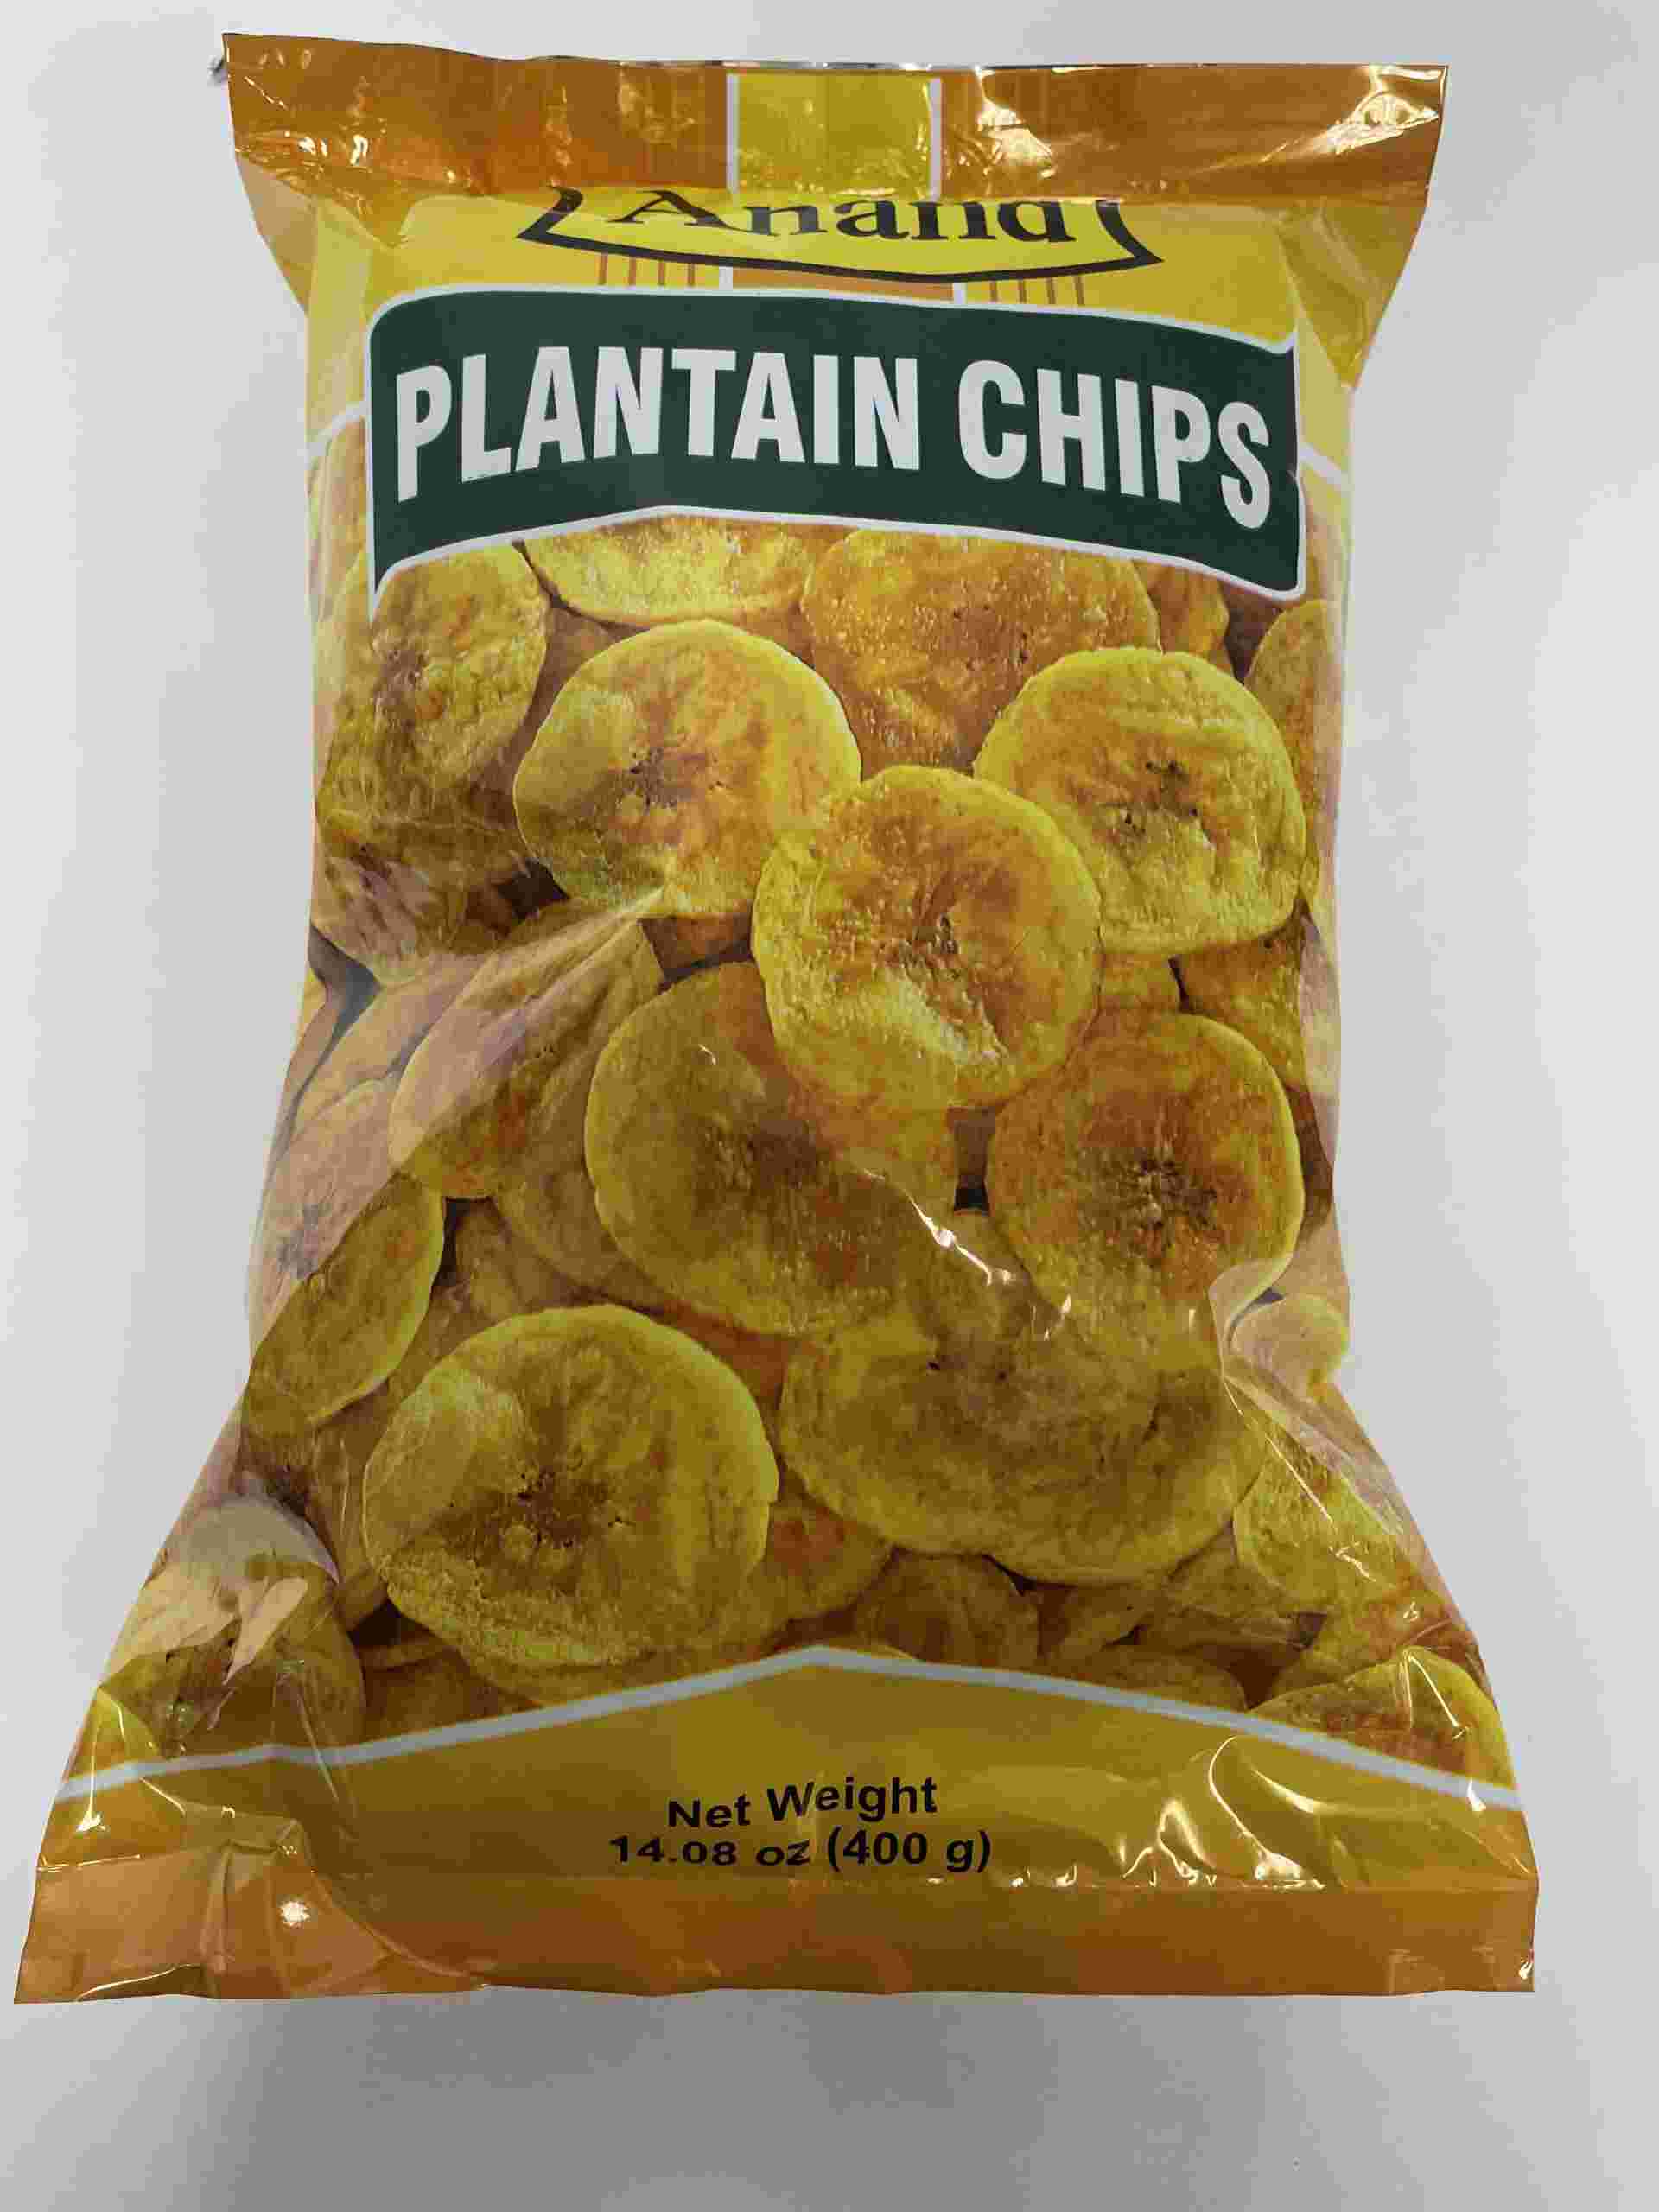 Anand Plantain Chips